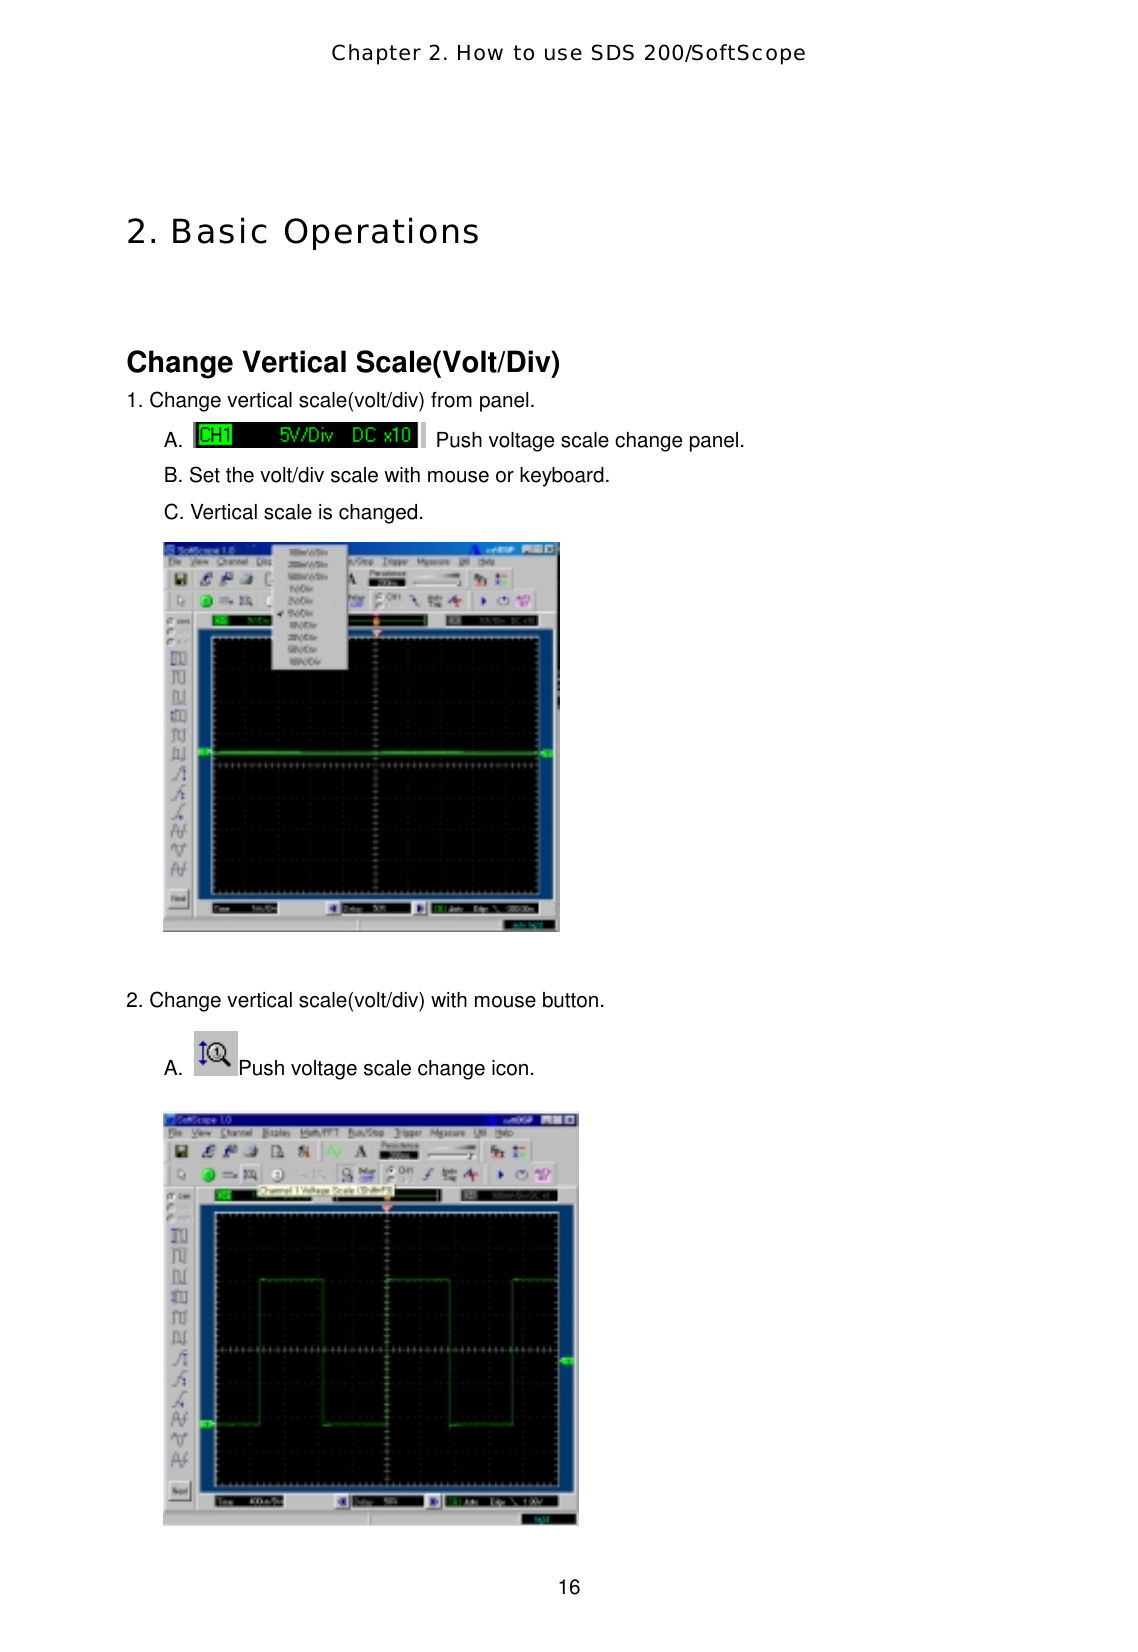 Chapter 2. How to use SDS 200/SoftScope  16  2. Basic Operations  Change Vertical Scale(Volt/Div) 1. Change vertical scale(volt/div) from panel. A.    Push voltage scale change panel.   B. Set the volt/div scale with mouse or keyboard. C. Vertical scale is changed.   2. Change vertical scale(volt/div) with mouse button. A.  Push voltage scale change icon.    